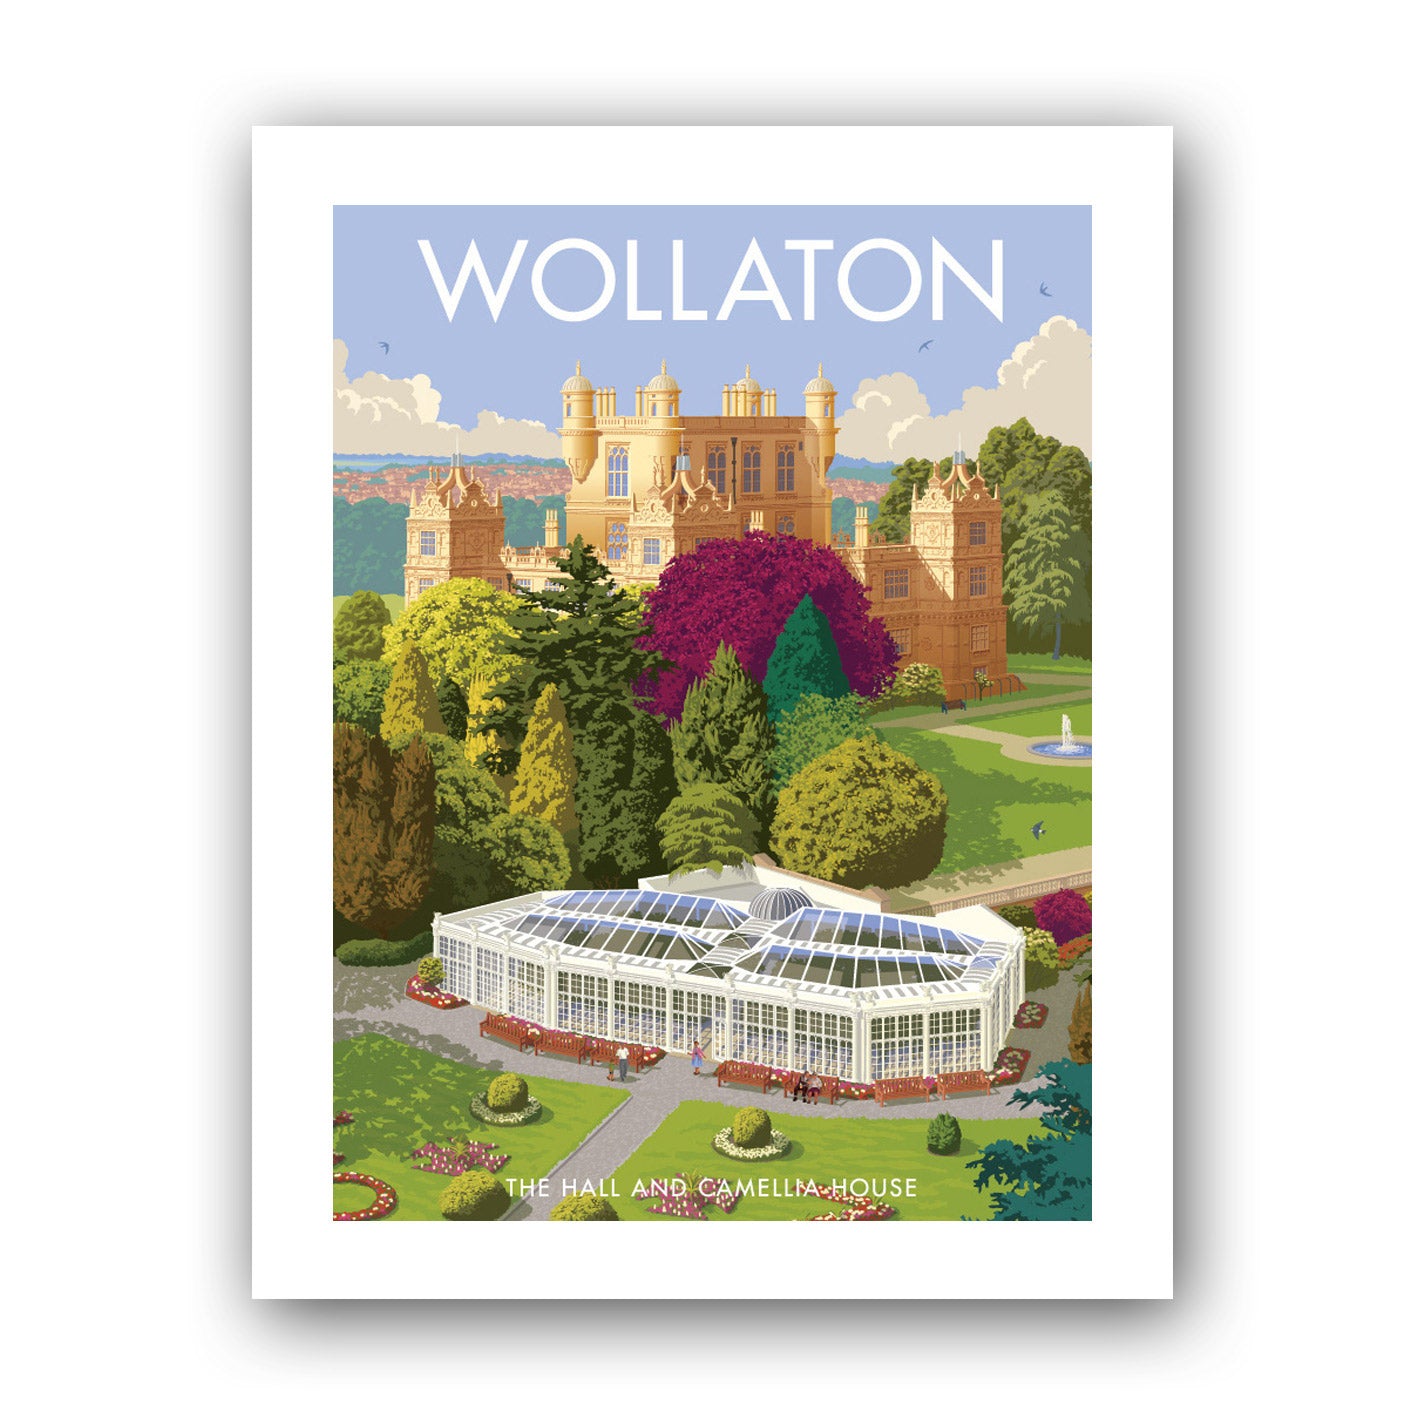 Wollaton, The Hall and Camellia House Art Print